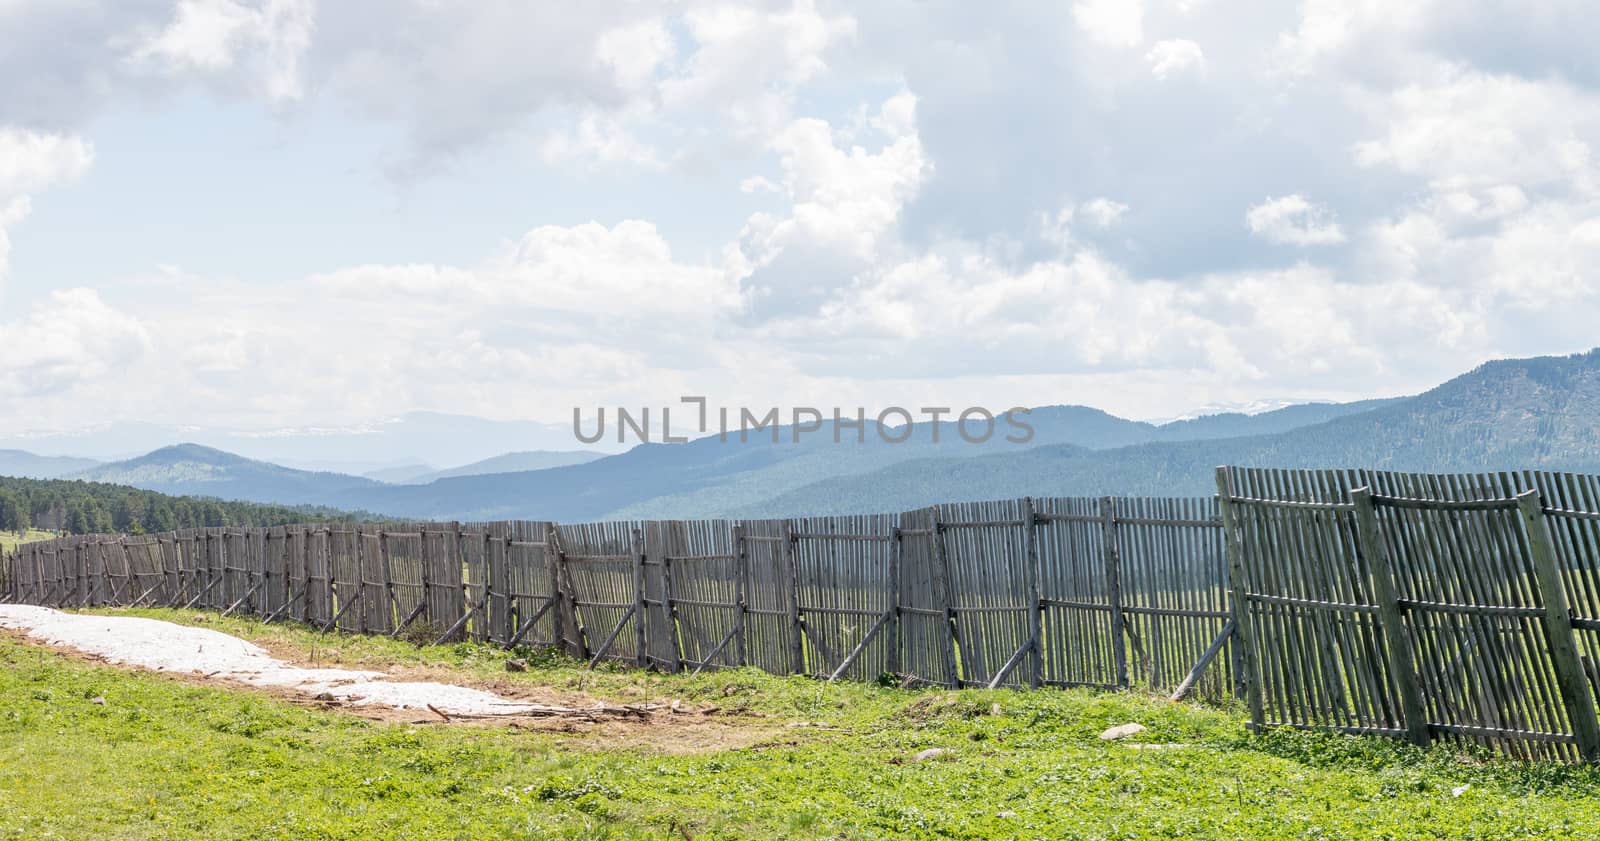 The idyllic landscape: view of the mountains behind the fence from the pass